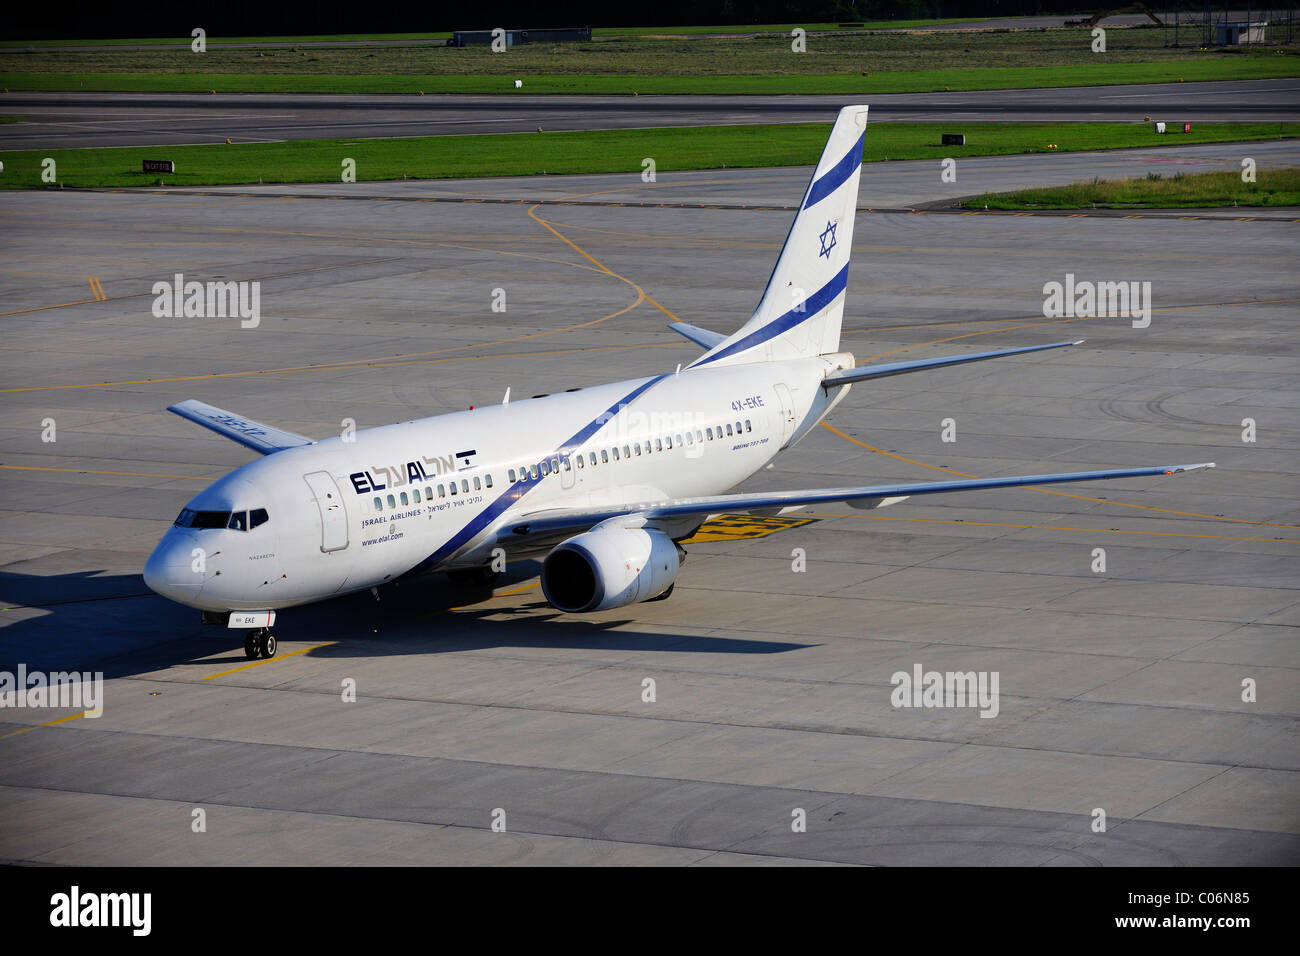 Boeing 737-700 from Israel Airlines at Zurich Airport, Switzerland, Europe  Stock Photo - Alamy